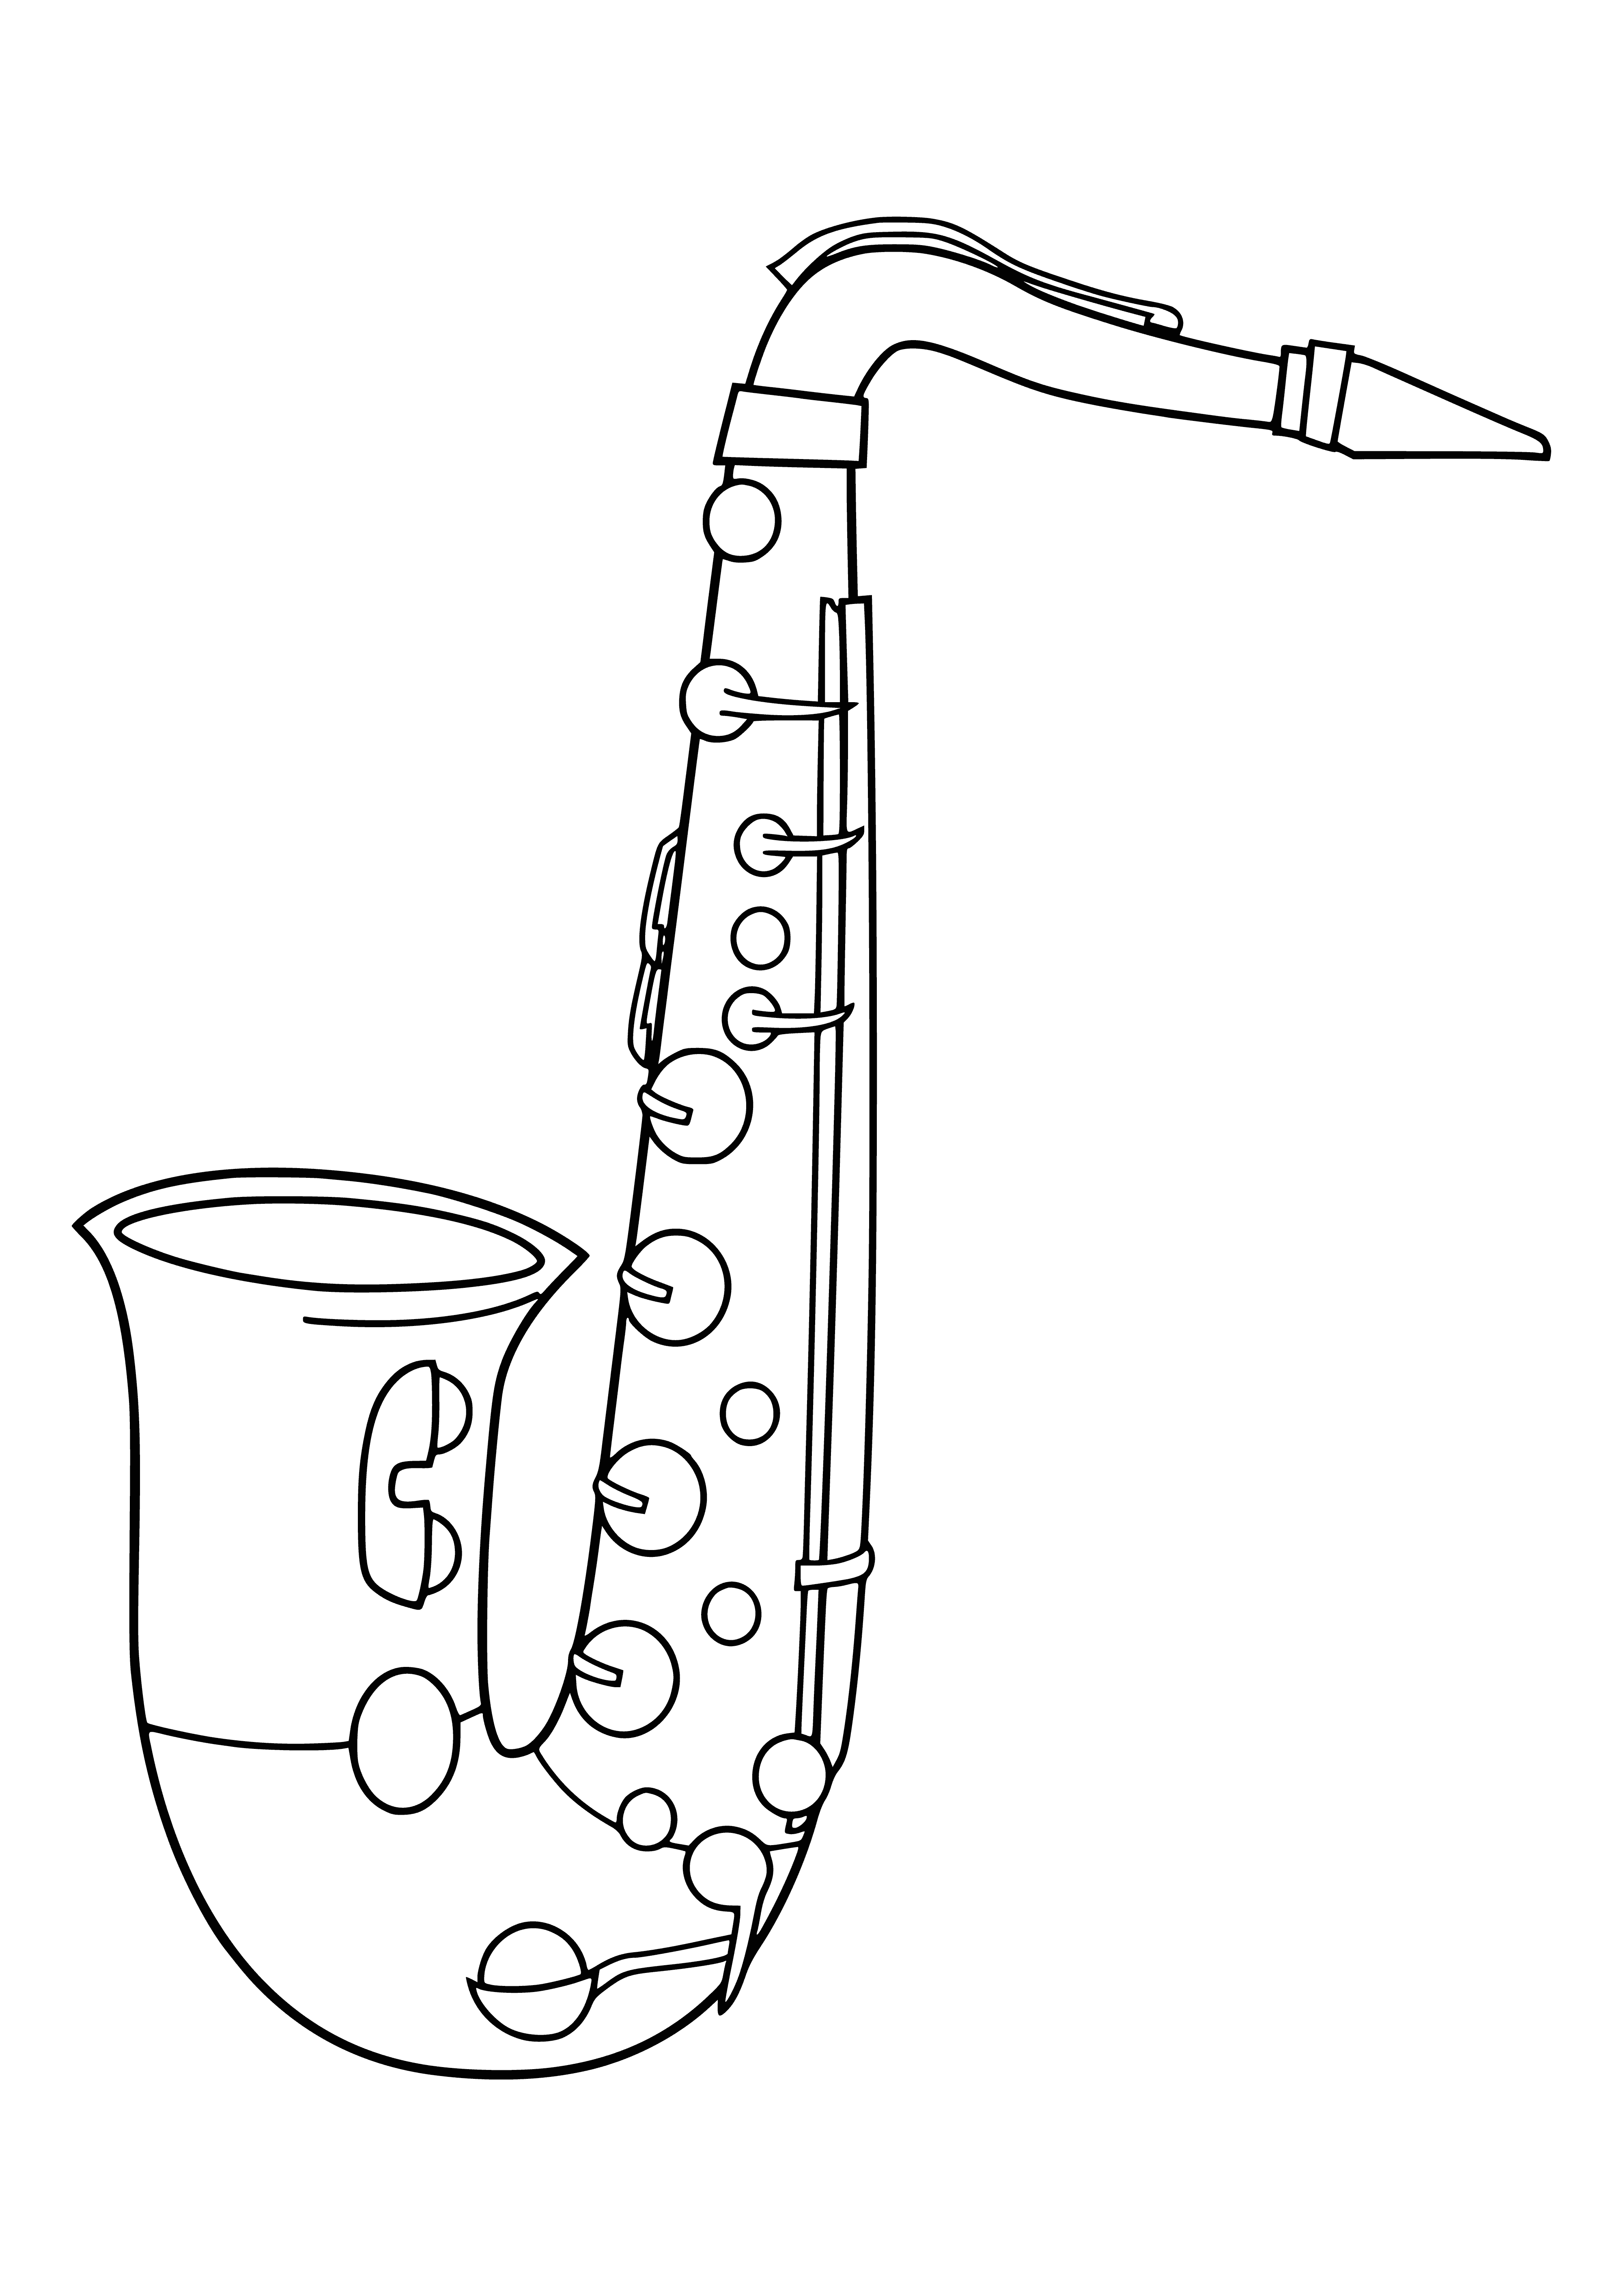 coloring page: Saxophone is a brass wind instrument in the woodwind family. Creates sound by blowing into mouthpiece & pressing keys.